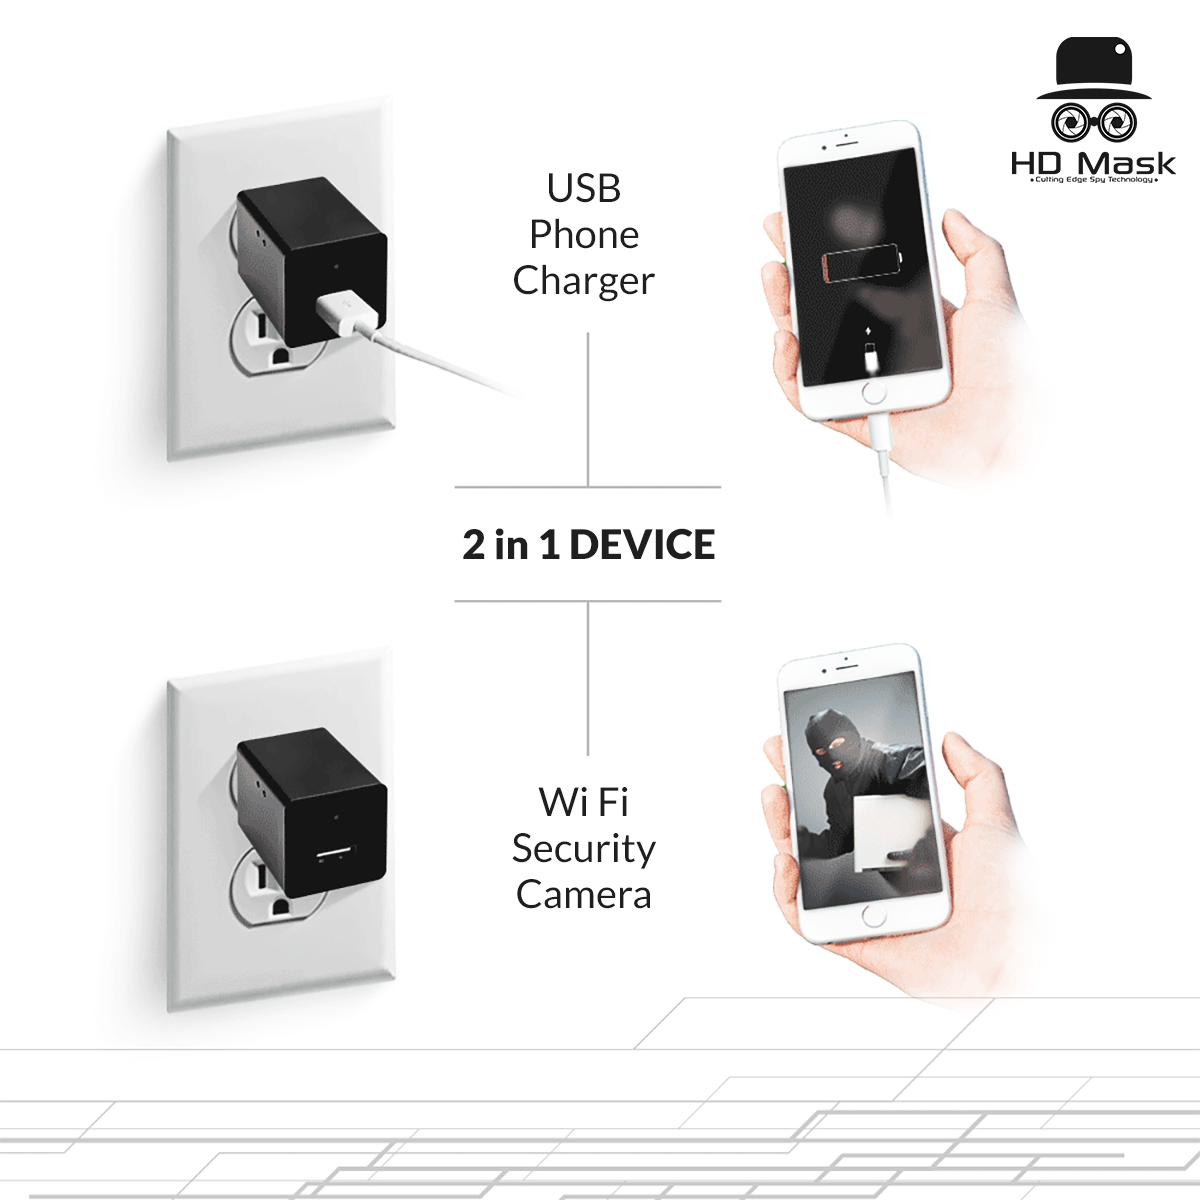 HD 1080P Security Camera USB Phone Charger